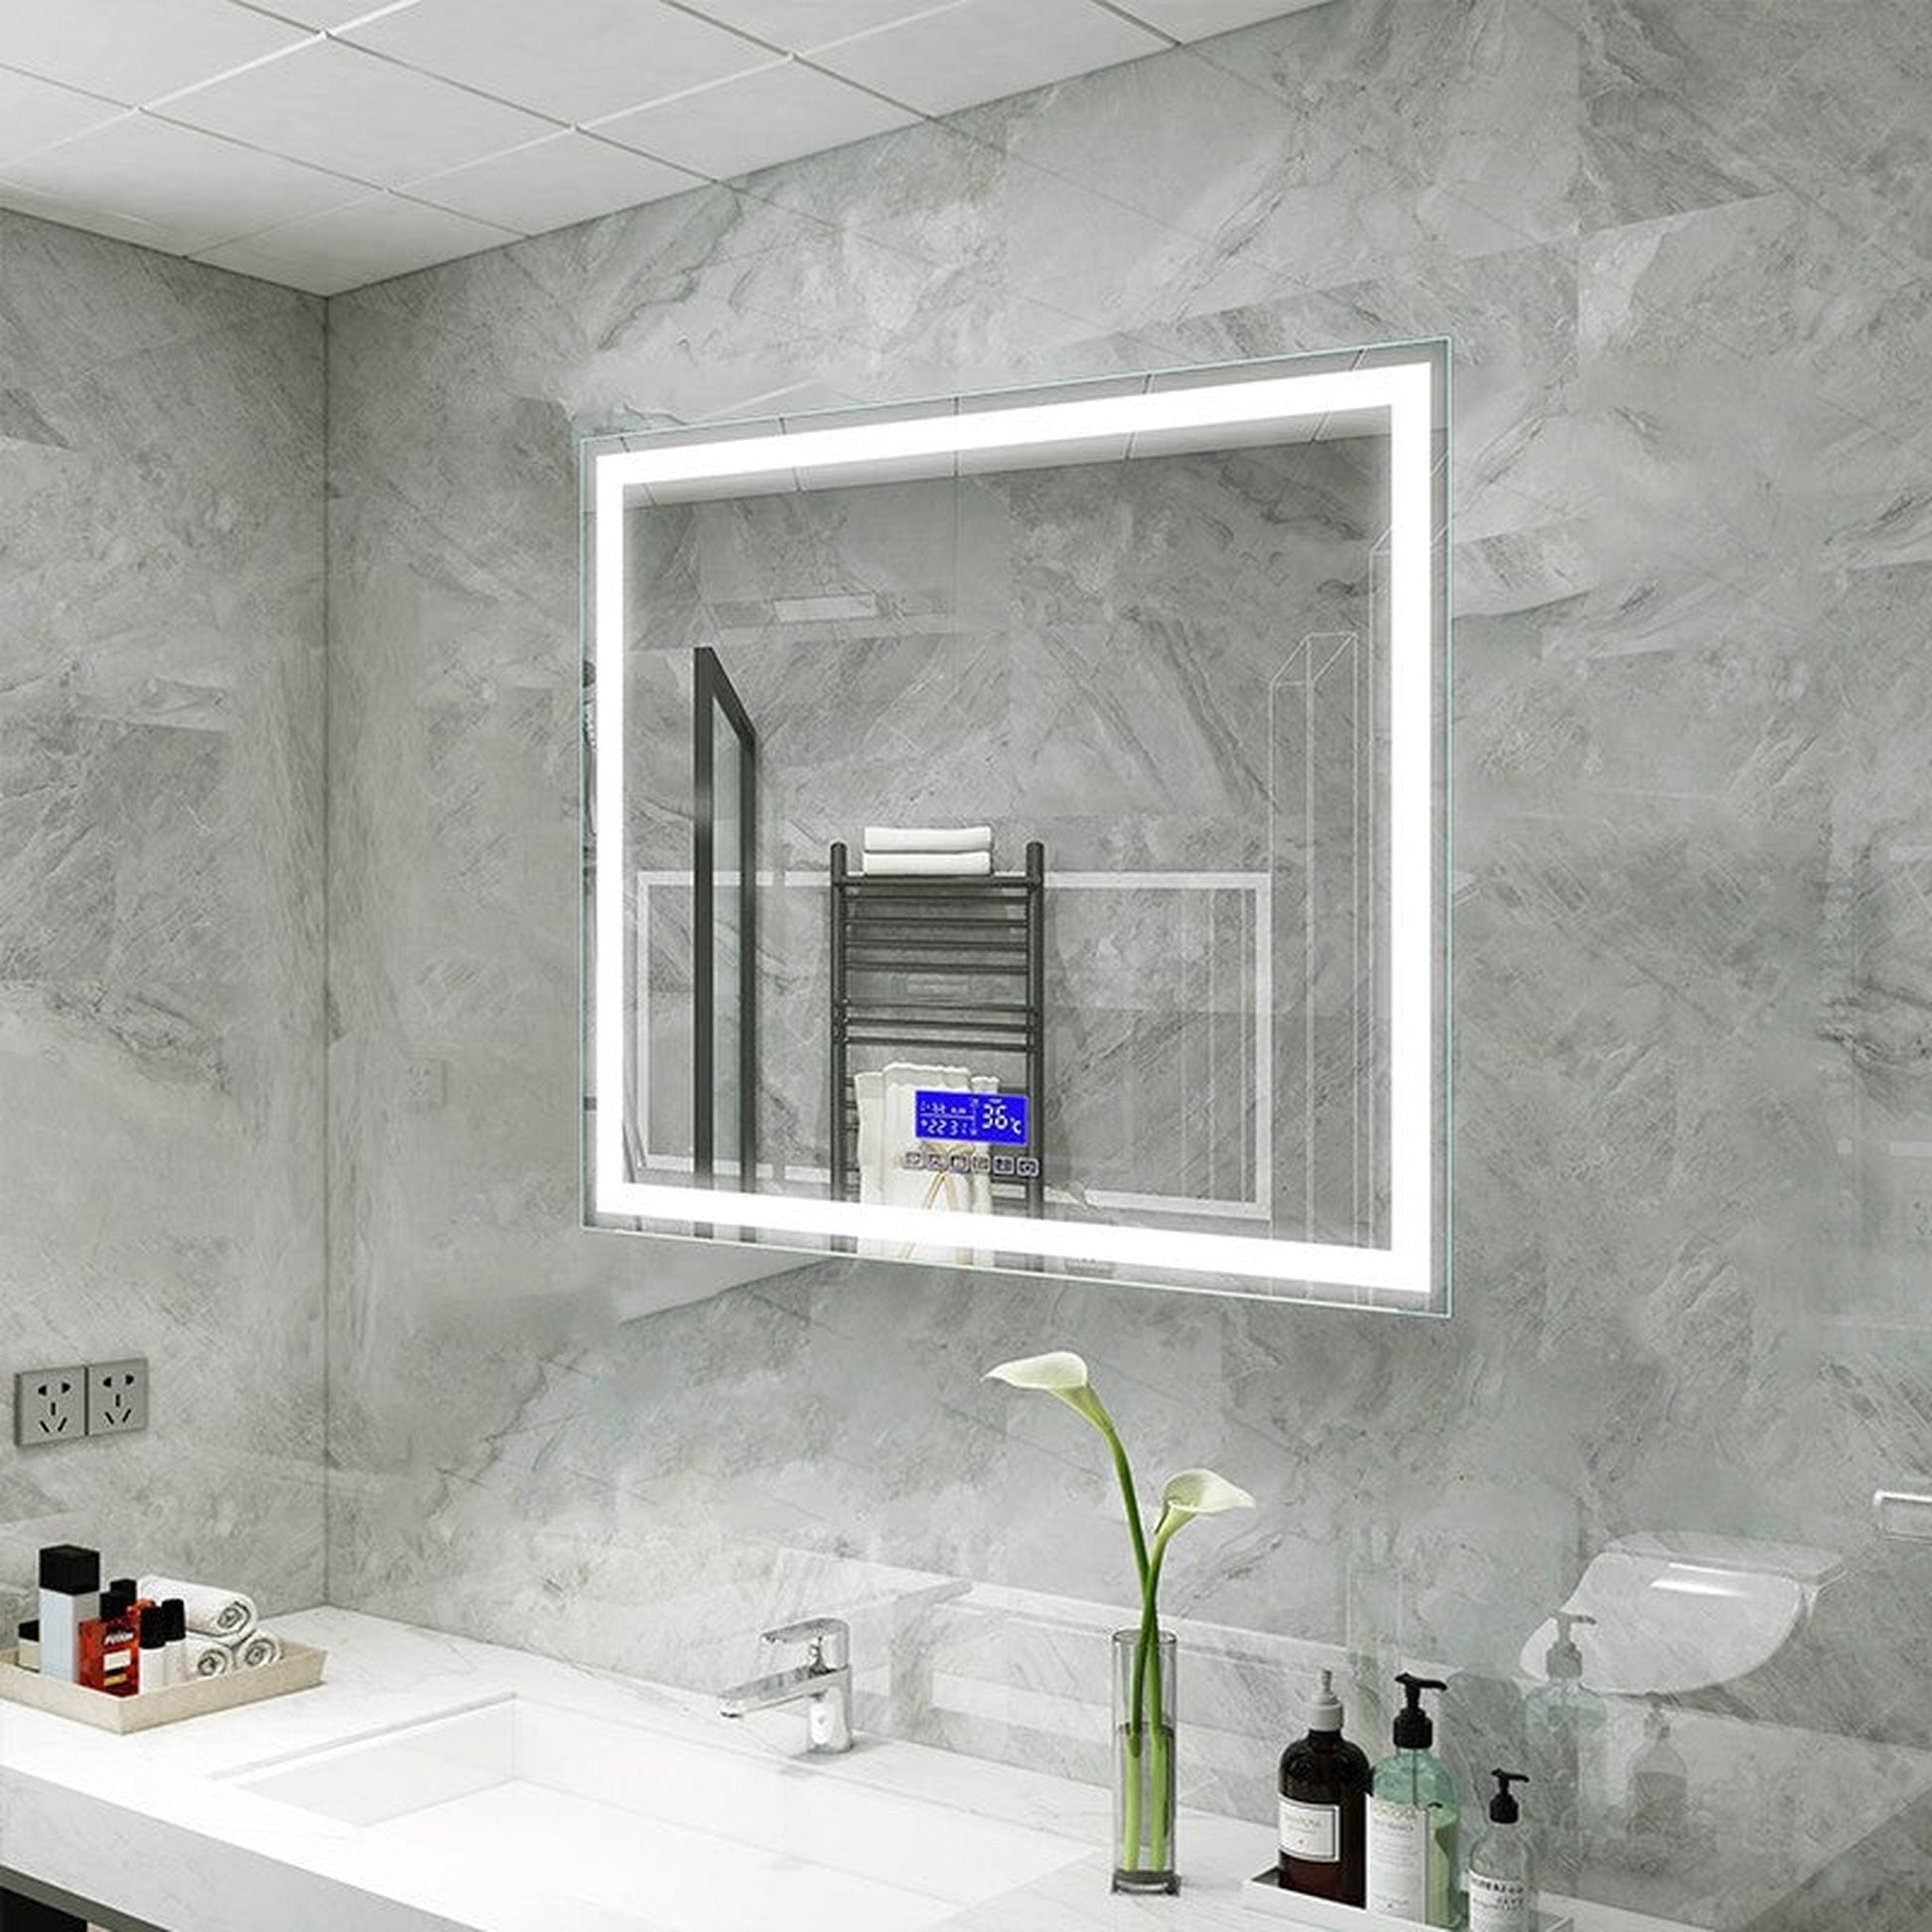 Moreno Florence 31" x 36" Frameless LED Mirror With Bluetooth, Time, and Temperature